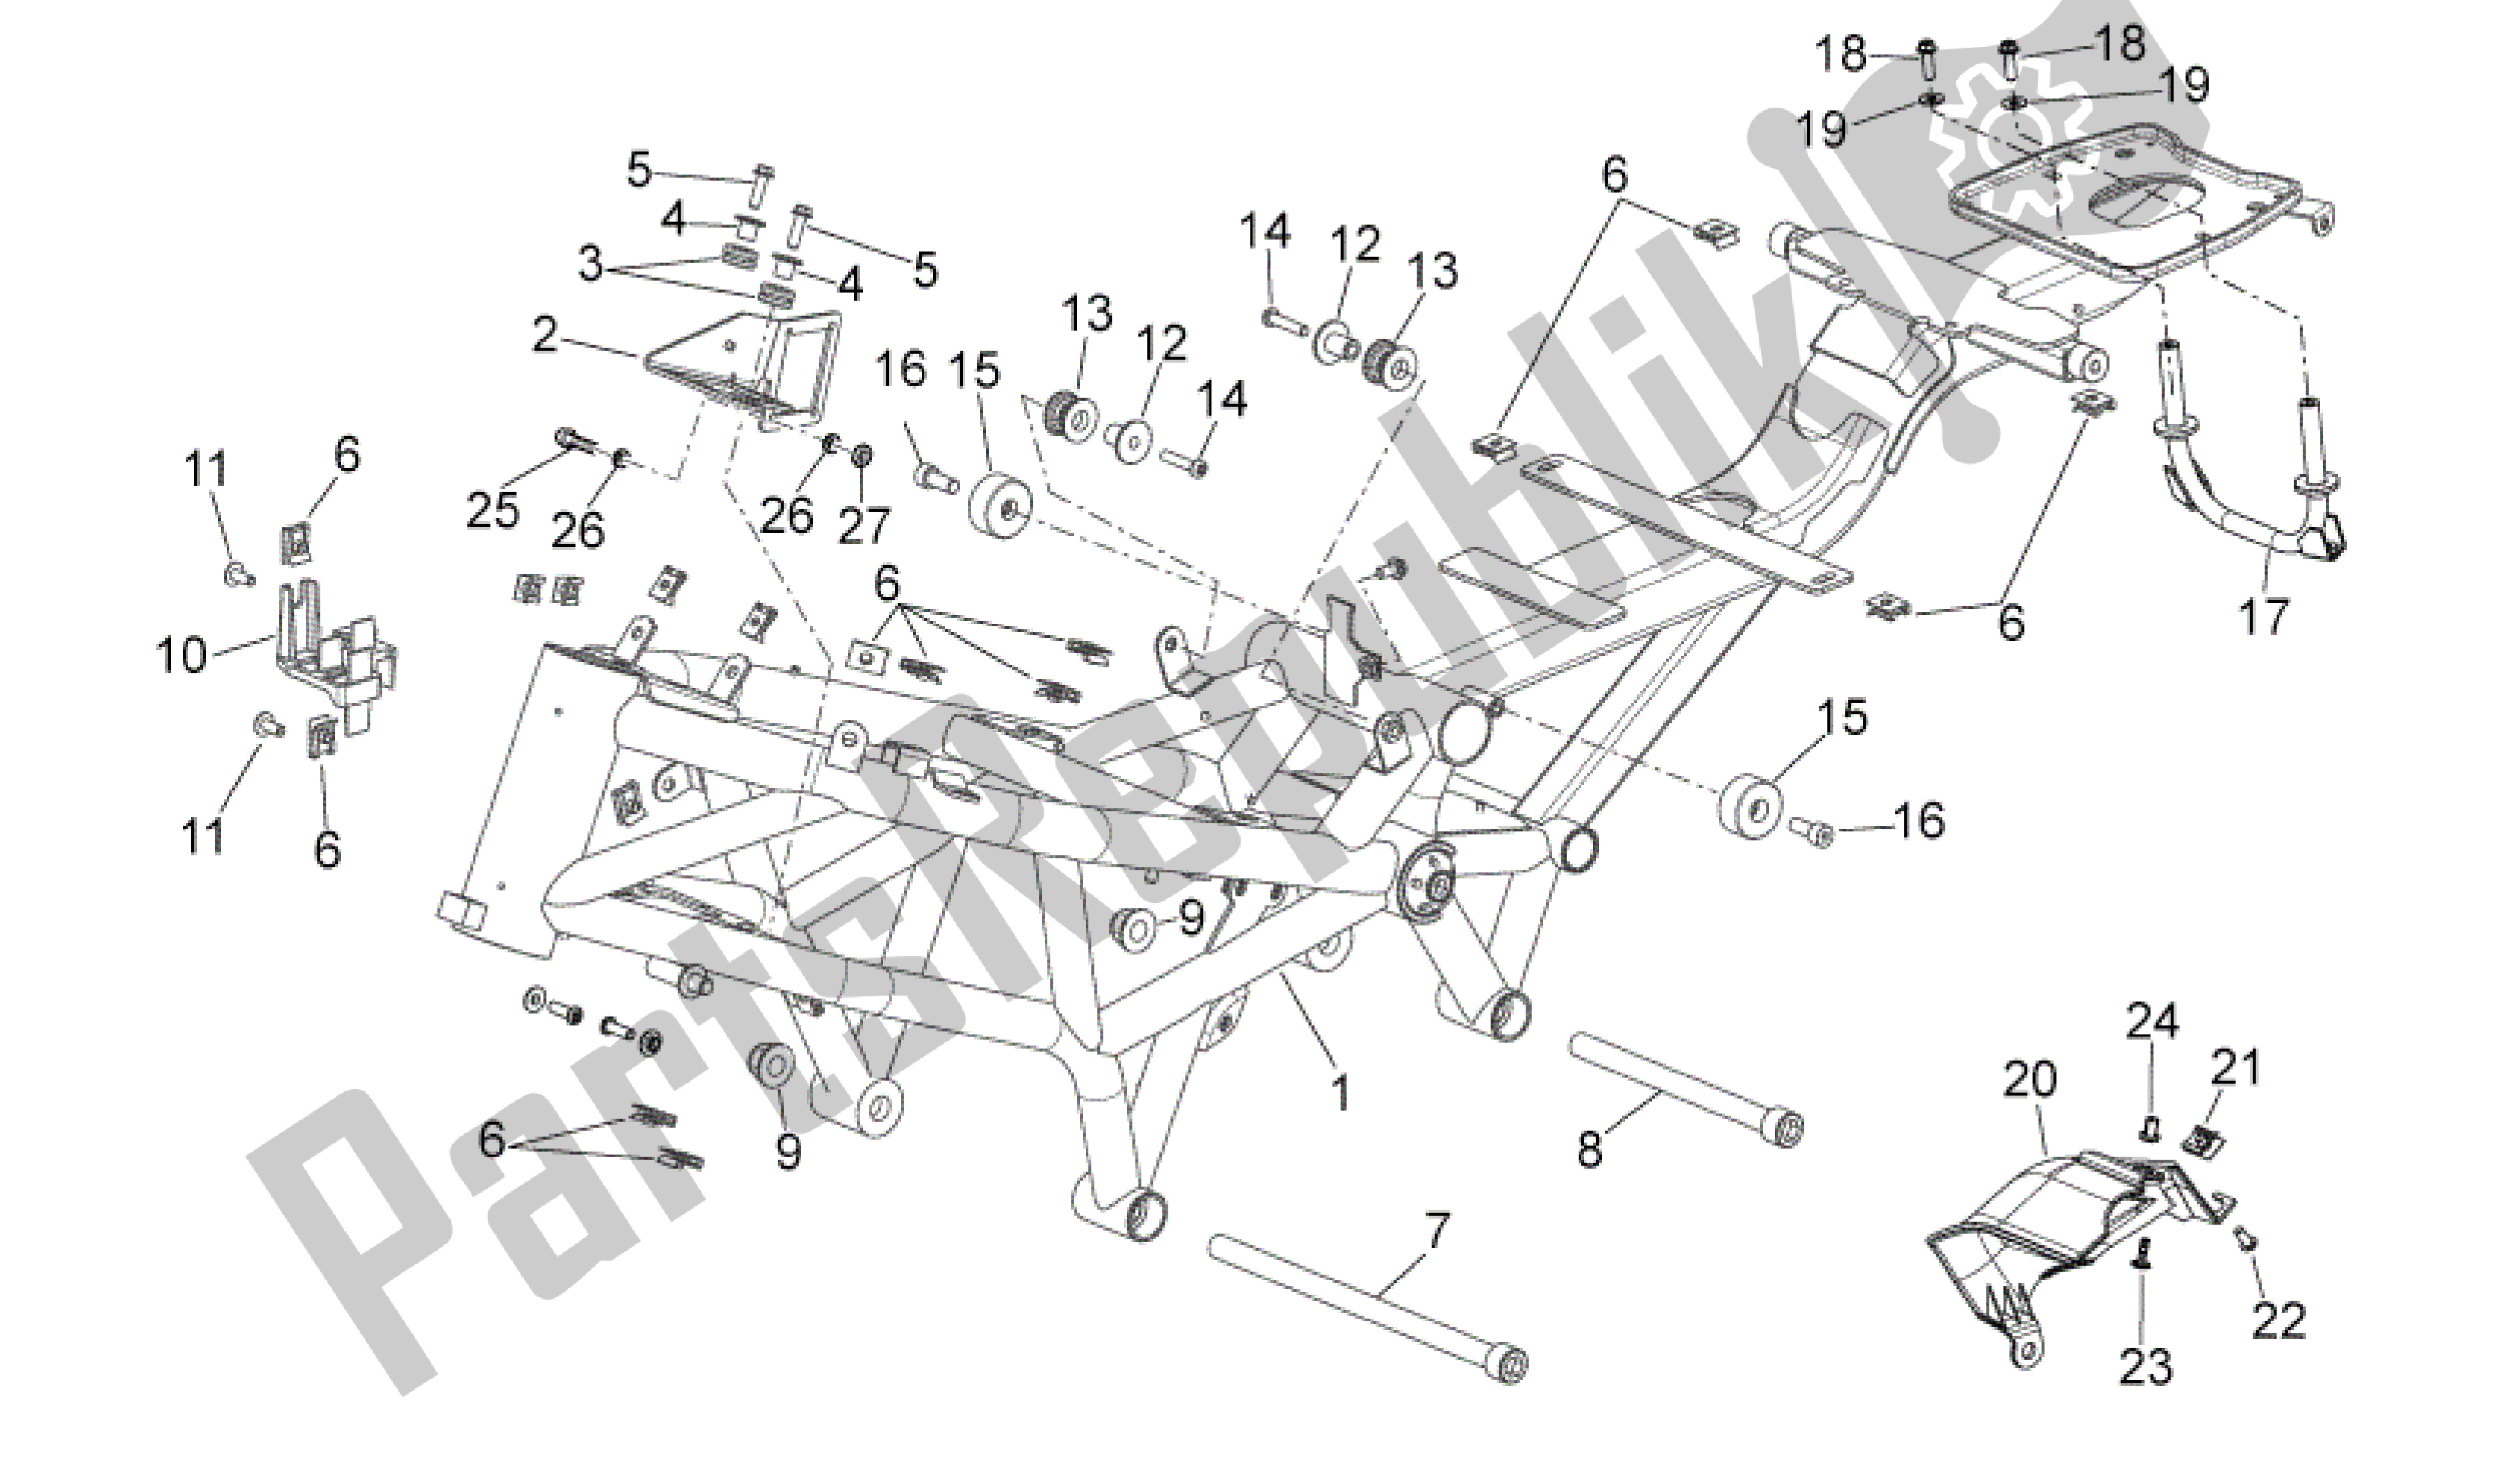 All parts for the Frame of the Aprilia Mana 850 2009 - 2011